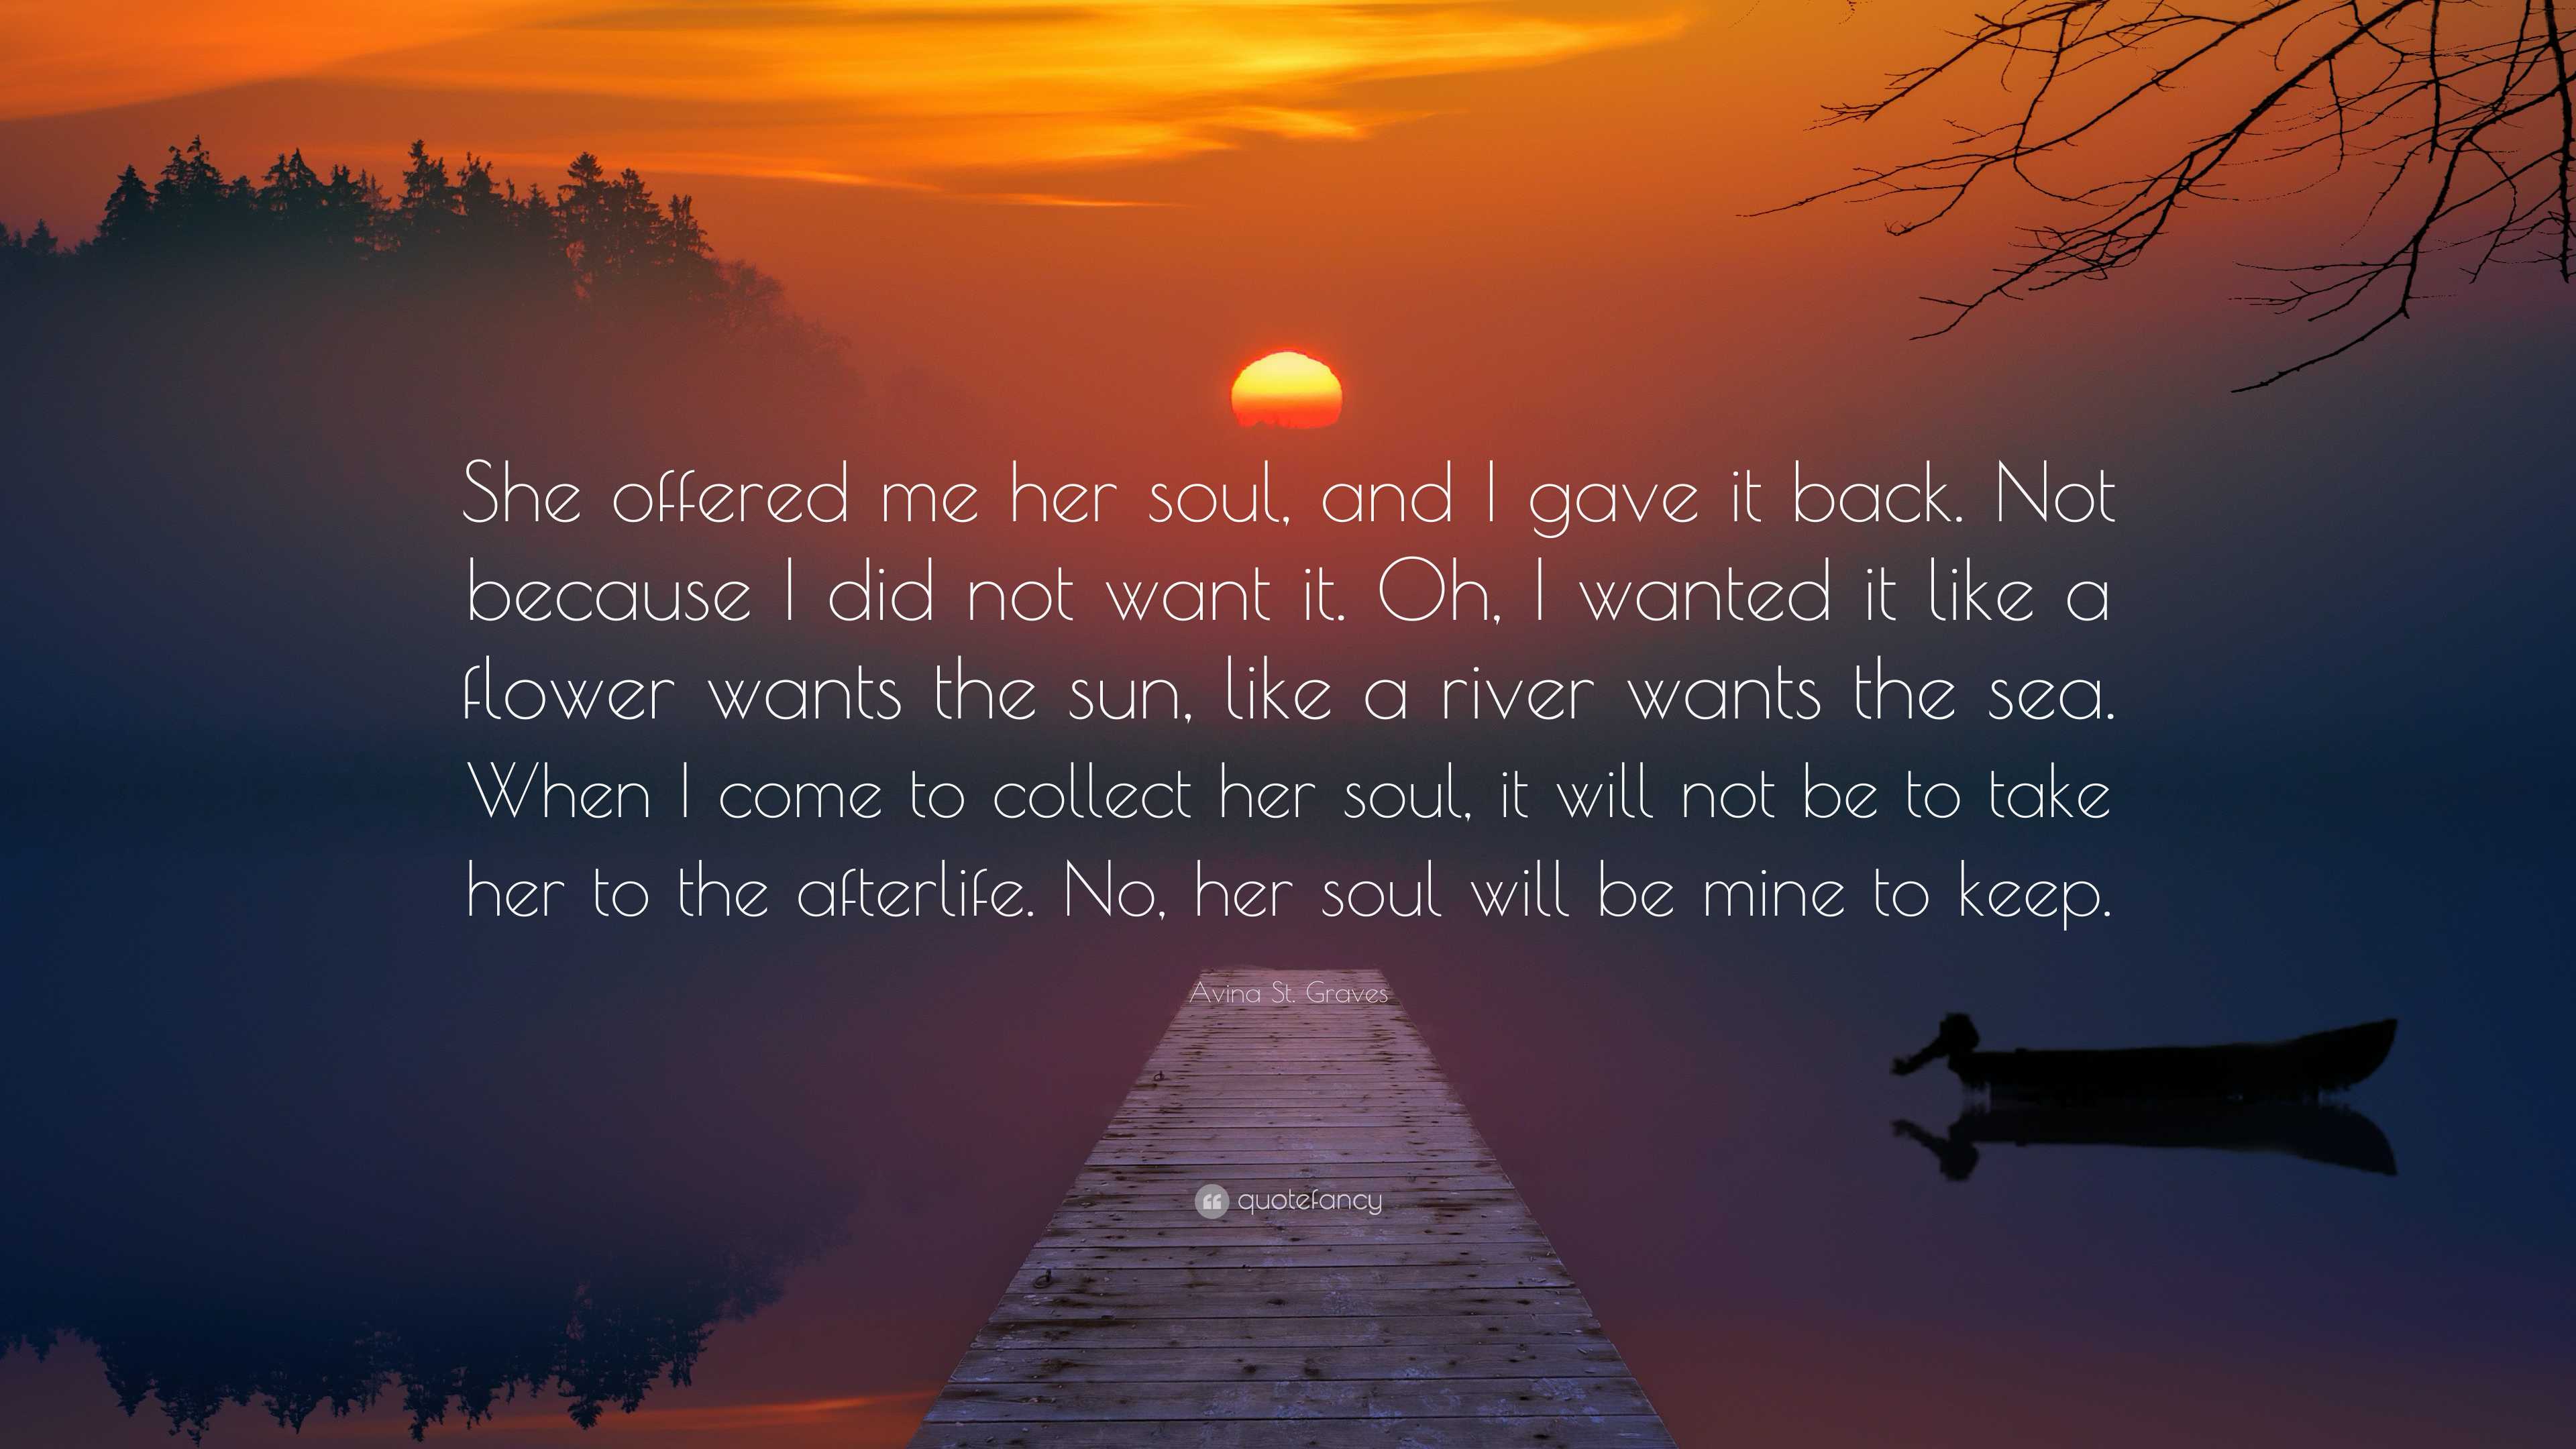 Avina St. Graves Quote: “She offered me her soul, and I gave it back ...